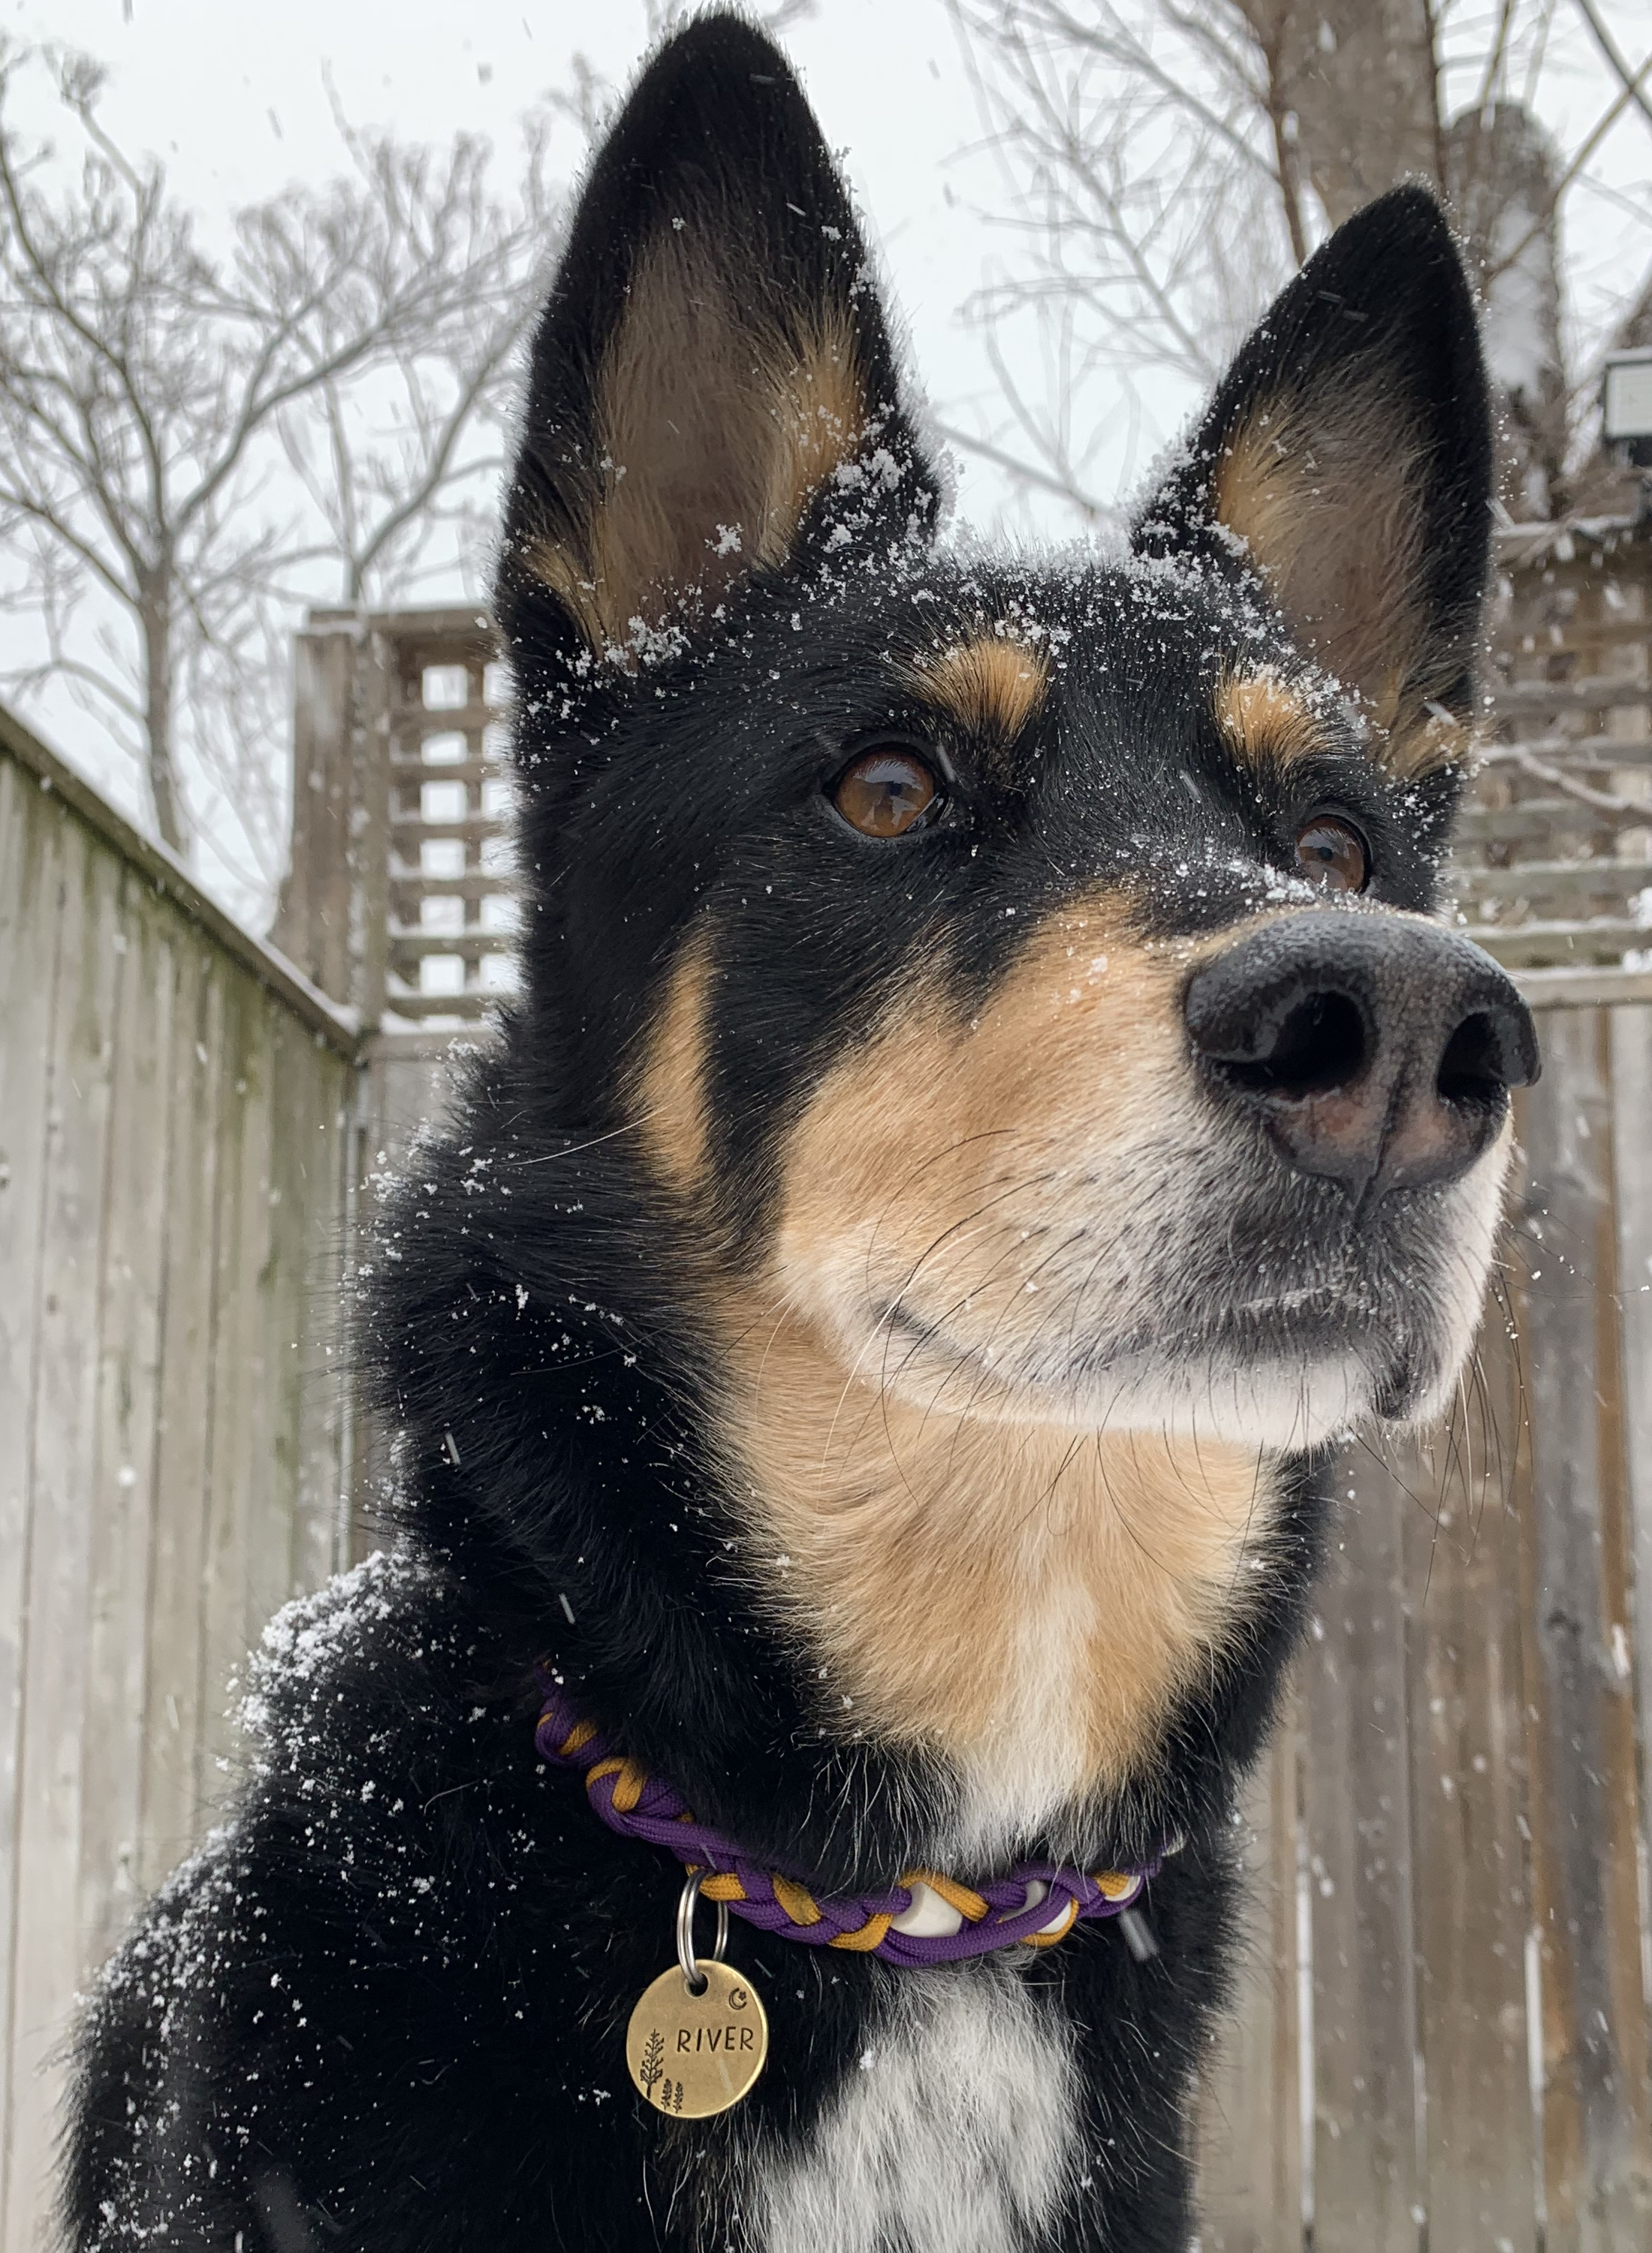 River a black and tan mixed breed dog dusted with snow flurries